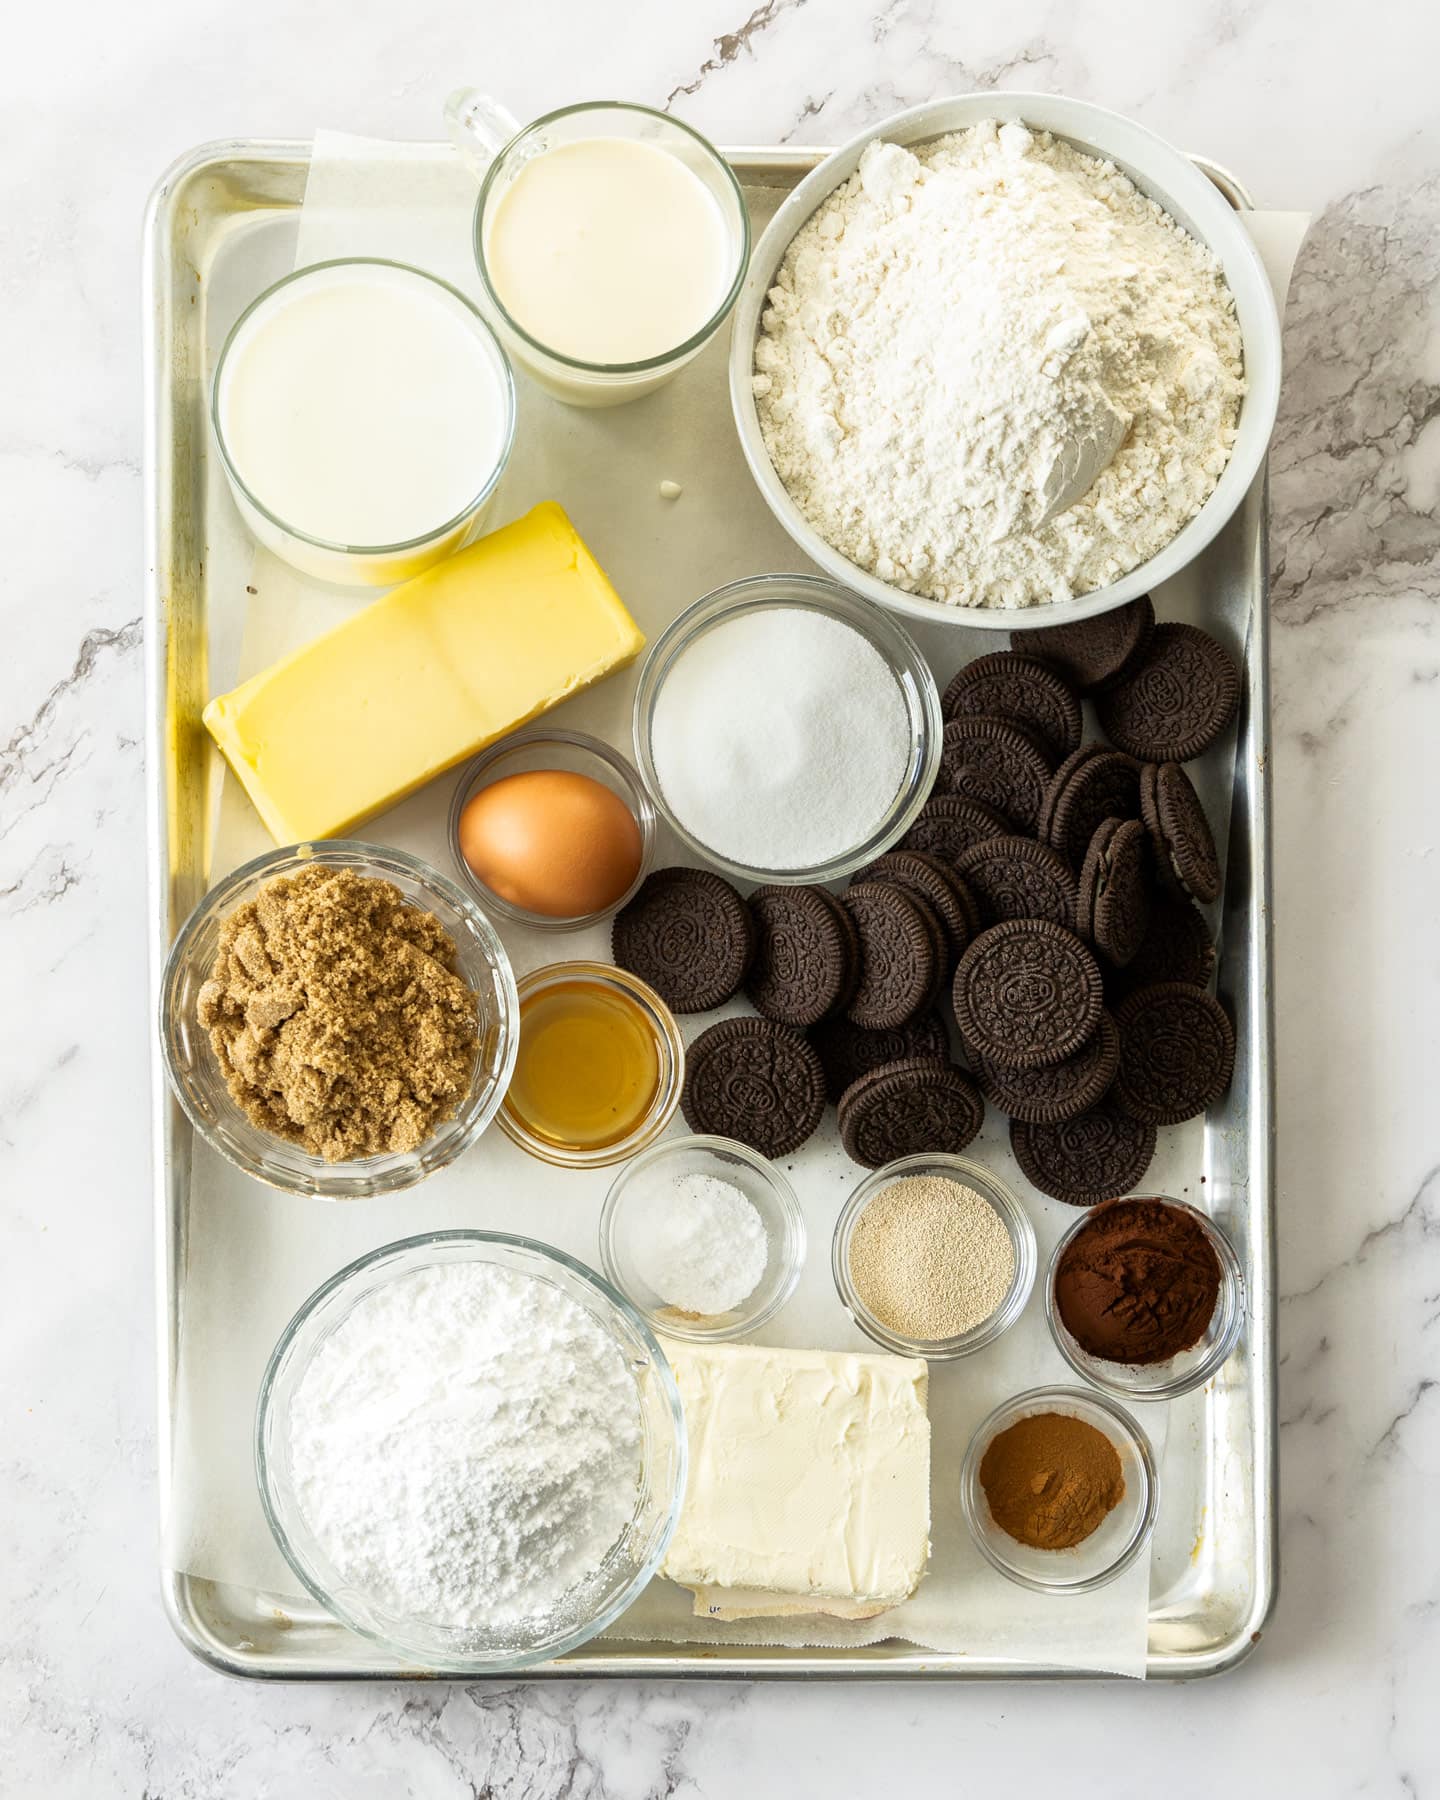 Ingredients for Oreo cinnamon rolls on a baking tray.